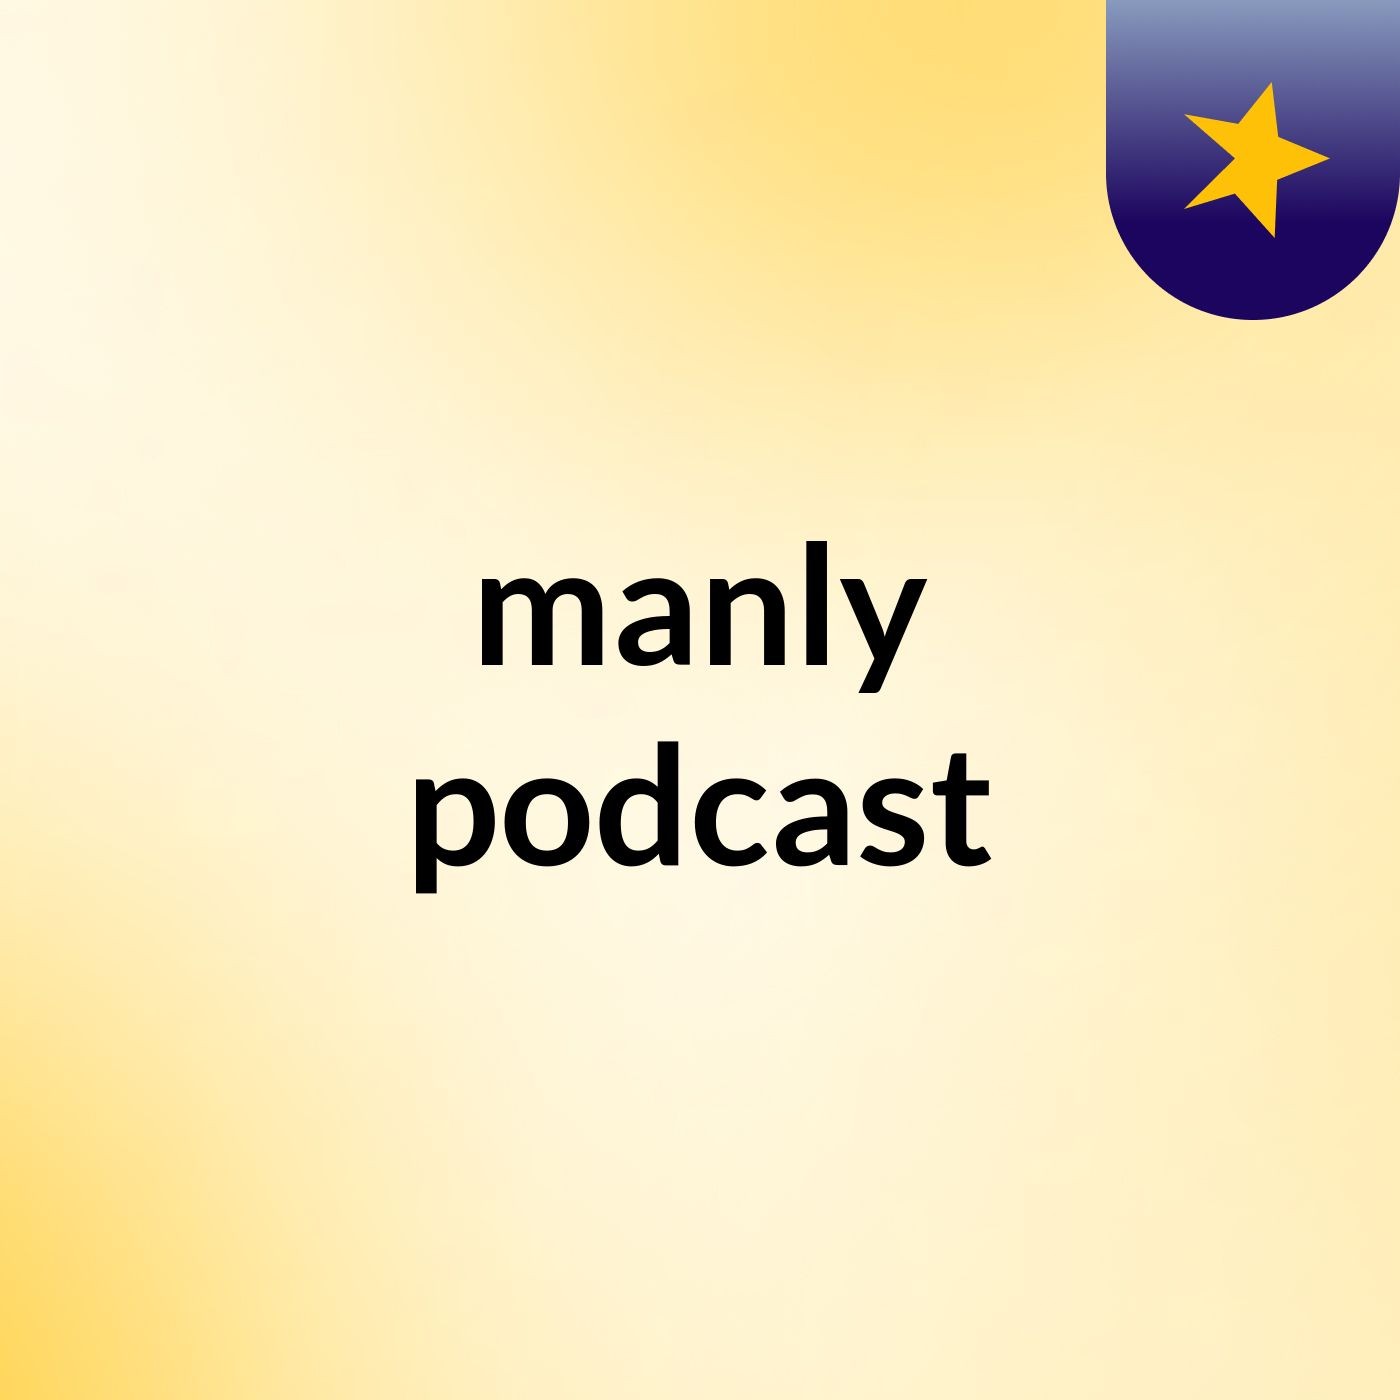 manly podcast